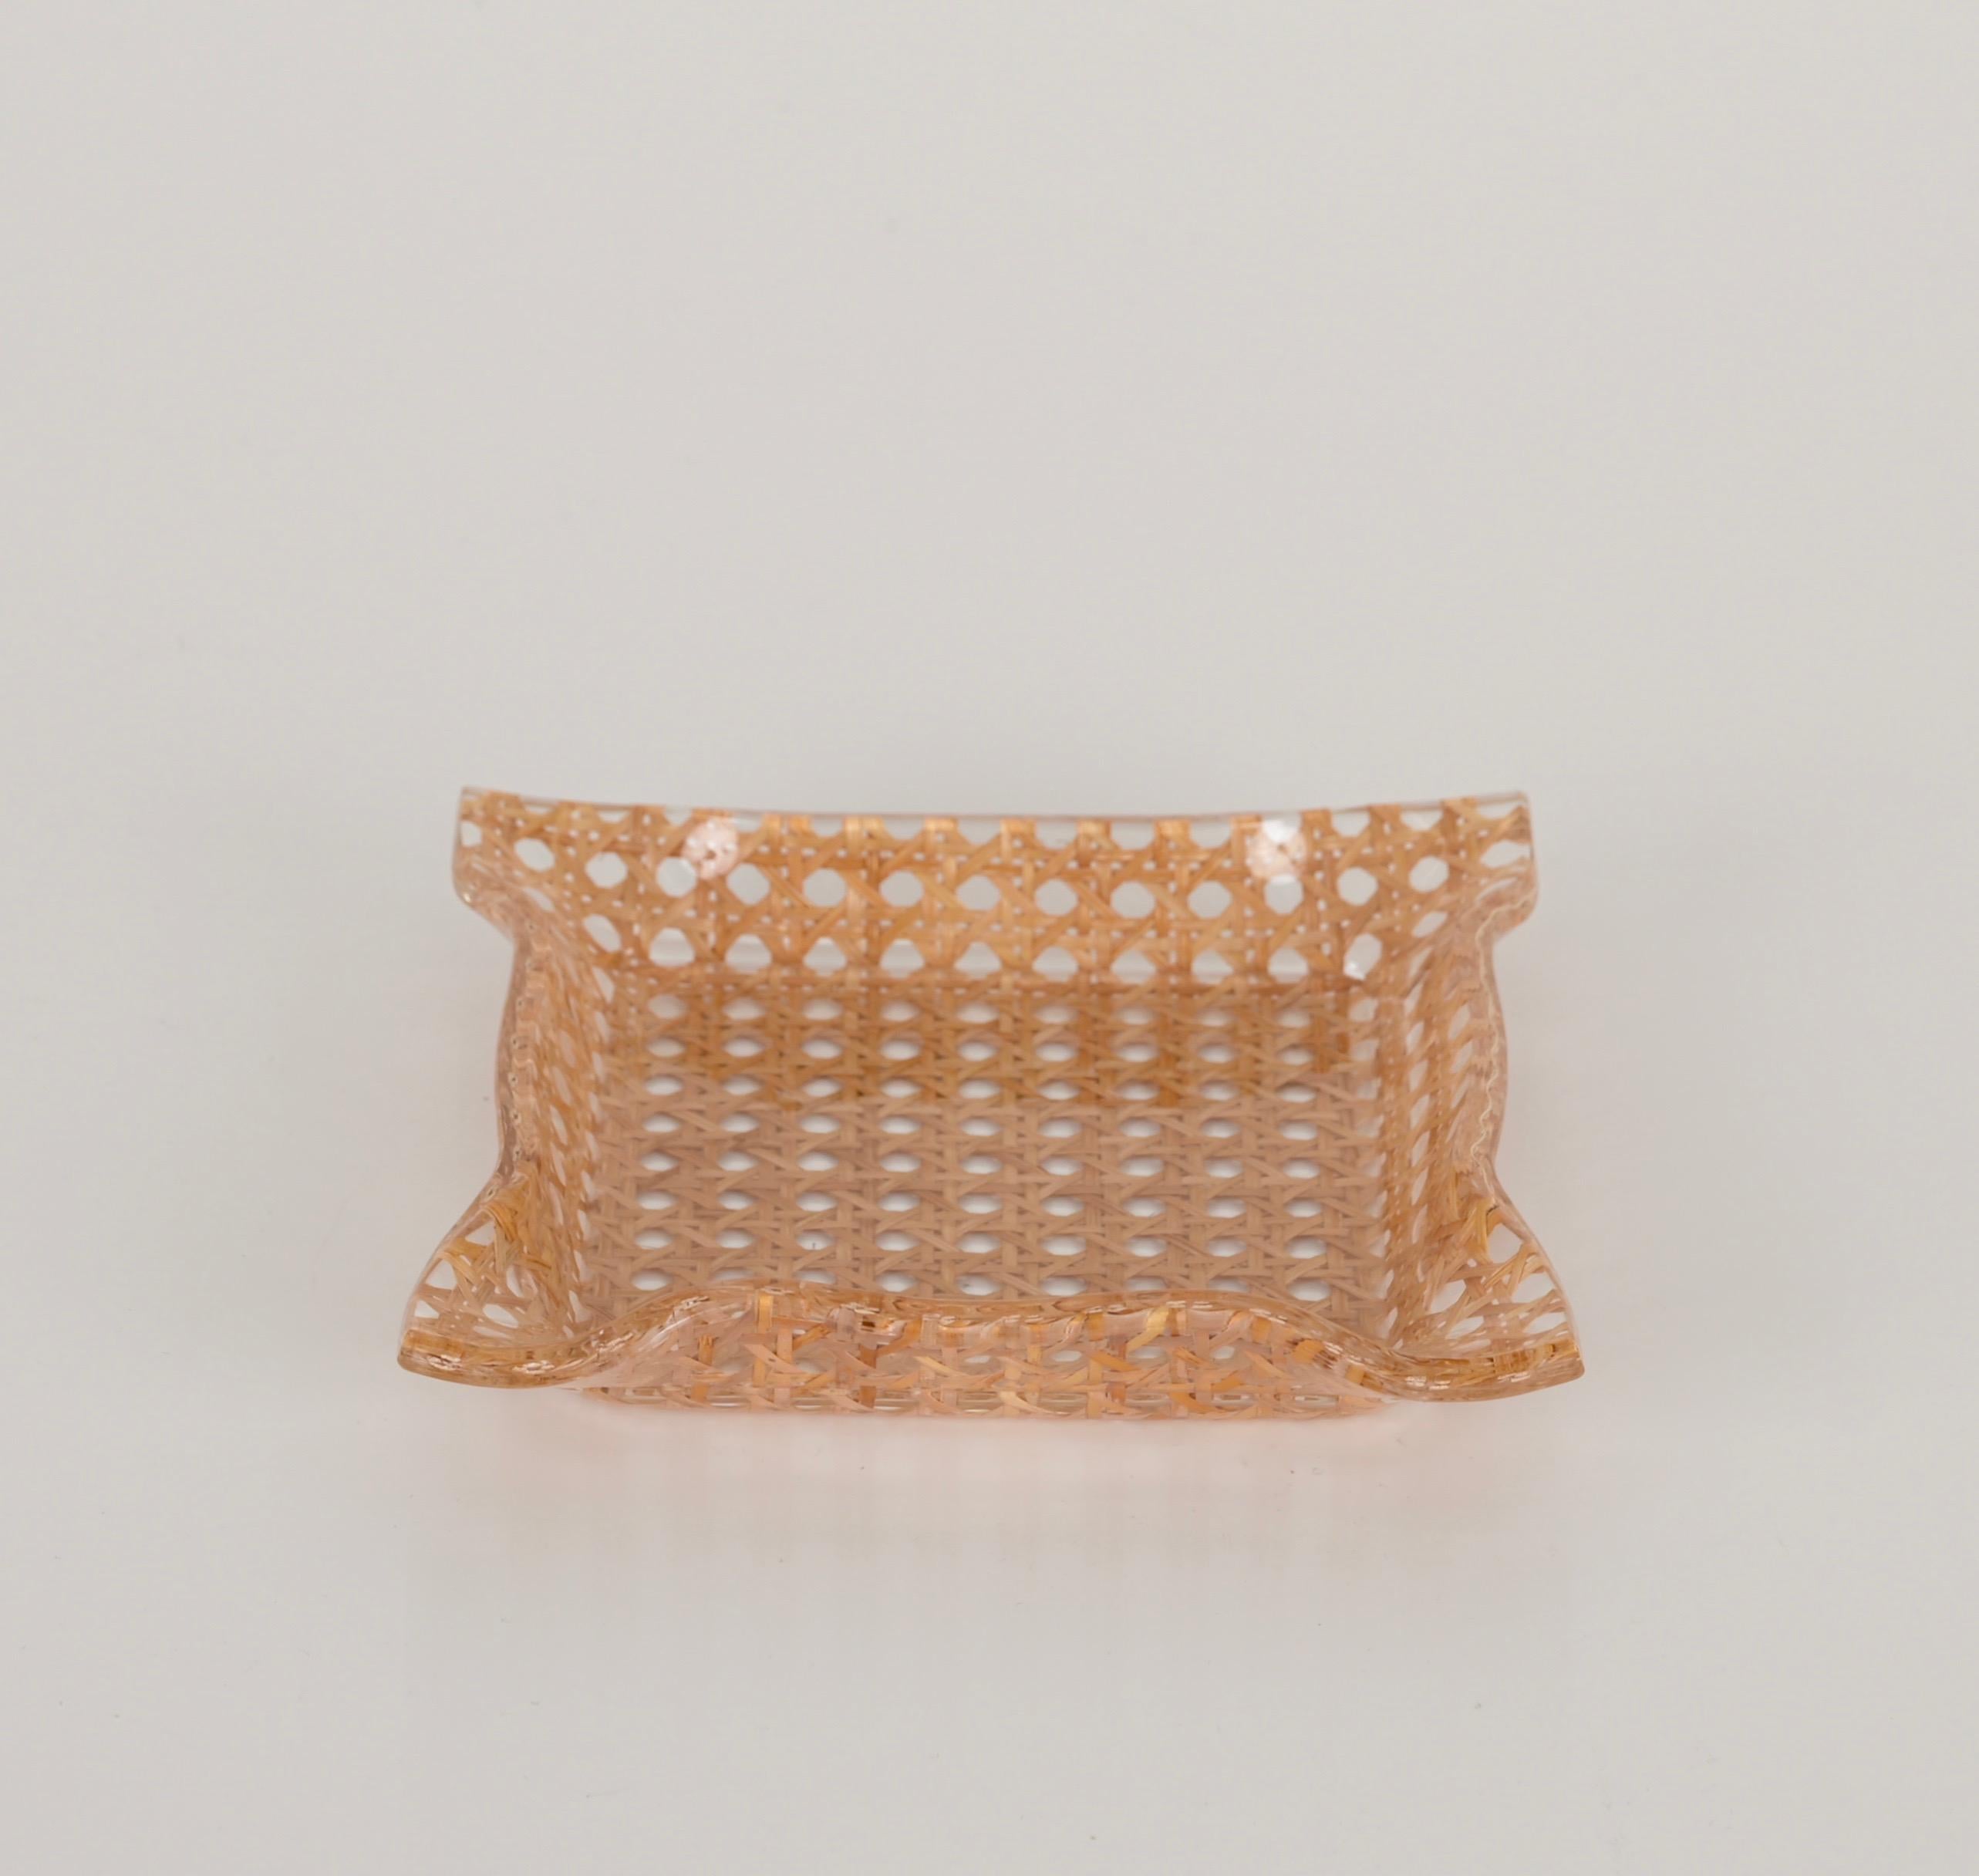 Hand-Crafted Vienna Straw Wicker and Lucite Vide-Poche Bowl, Dior Style, Italy 1970s  For Sale